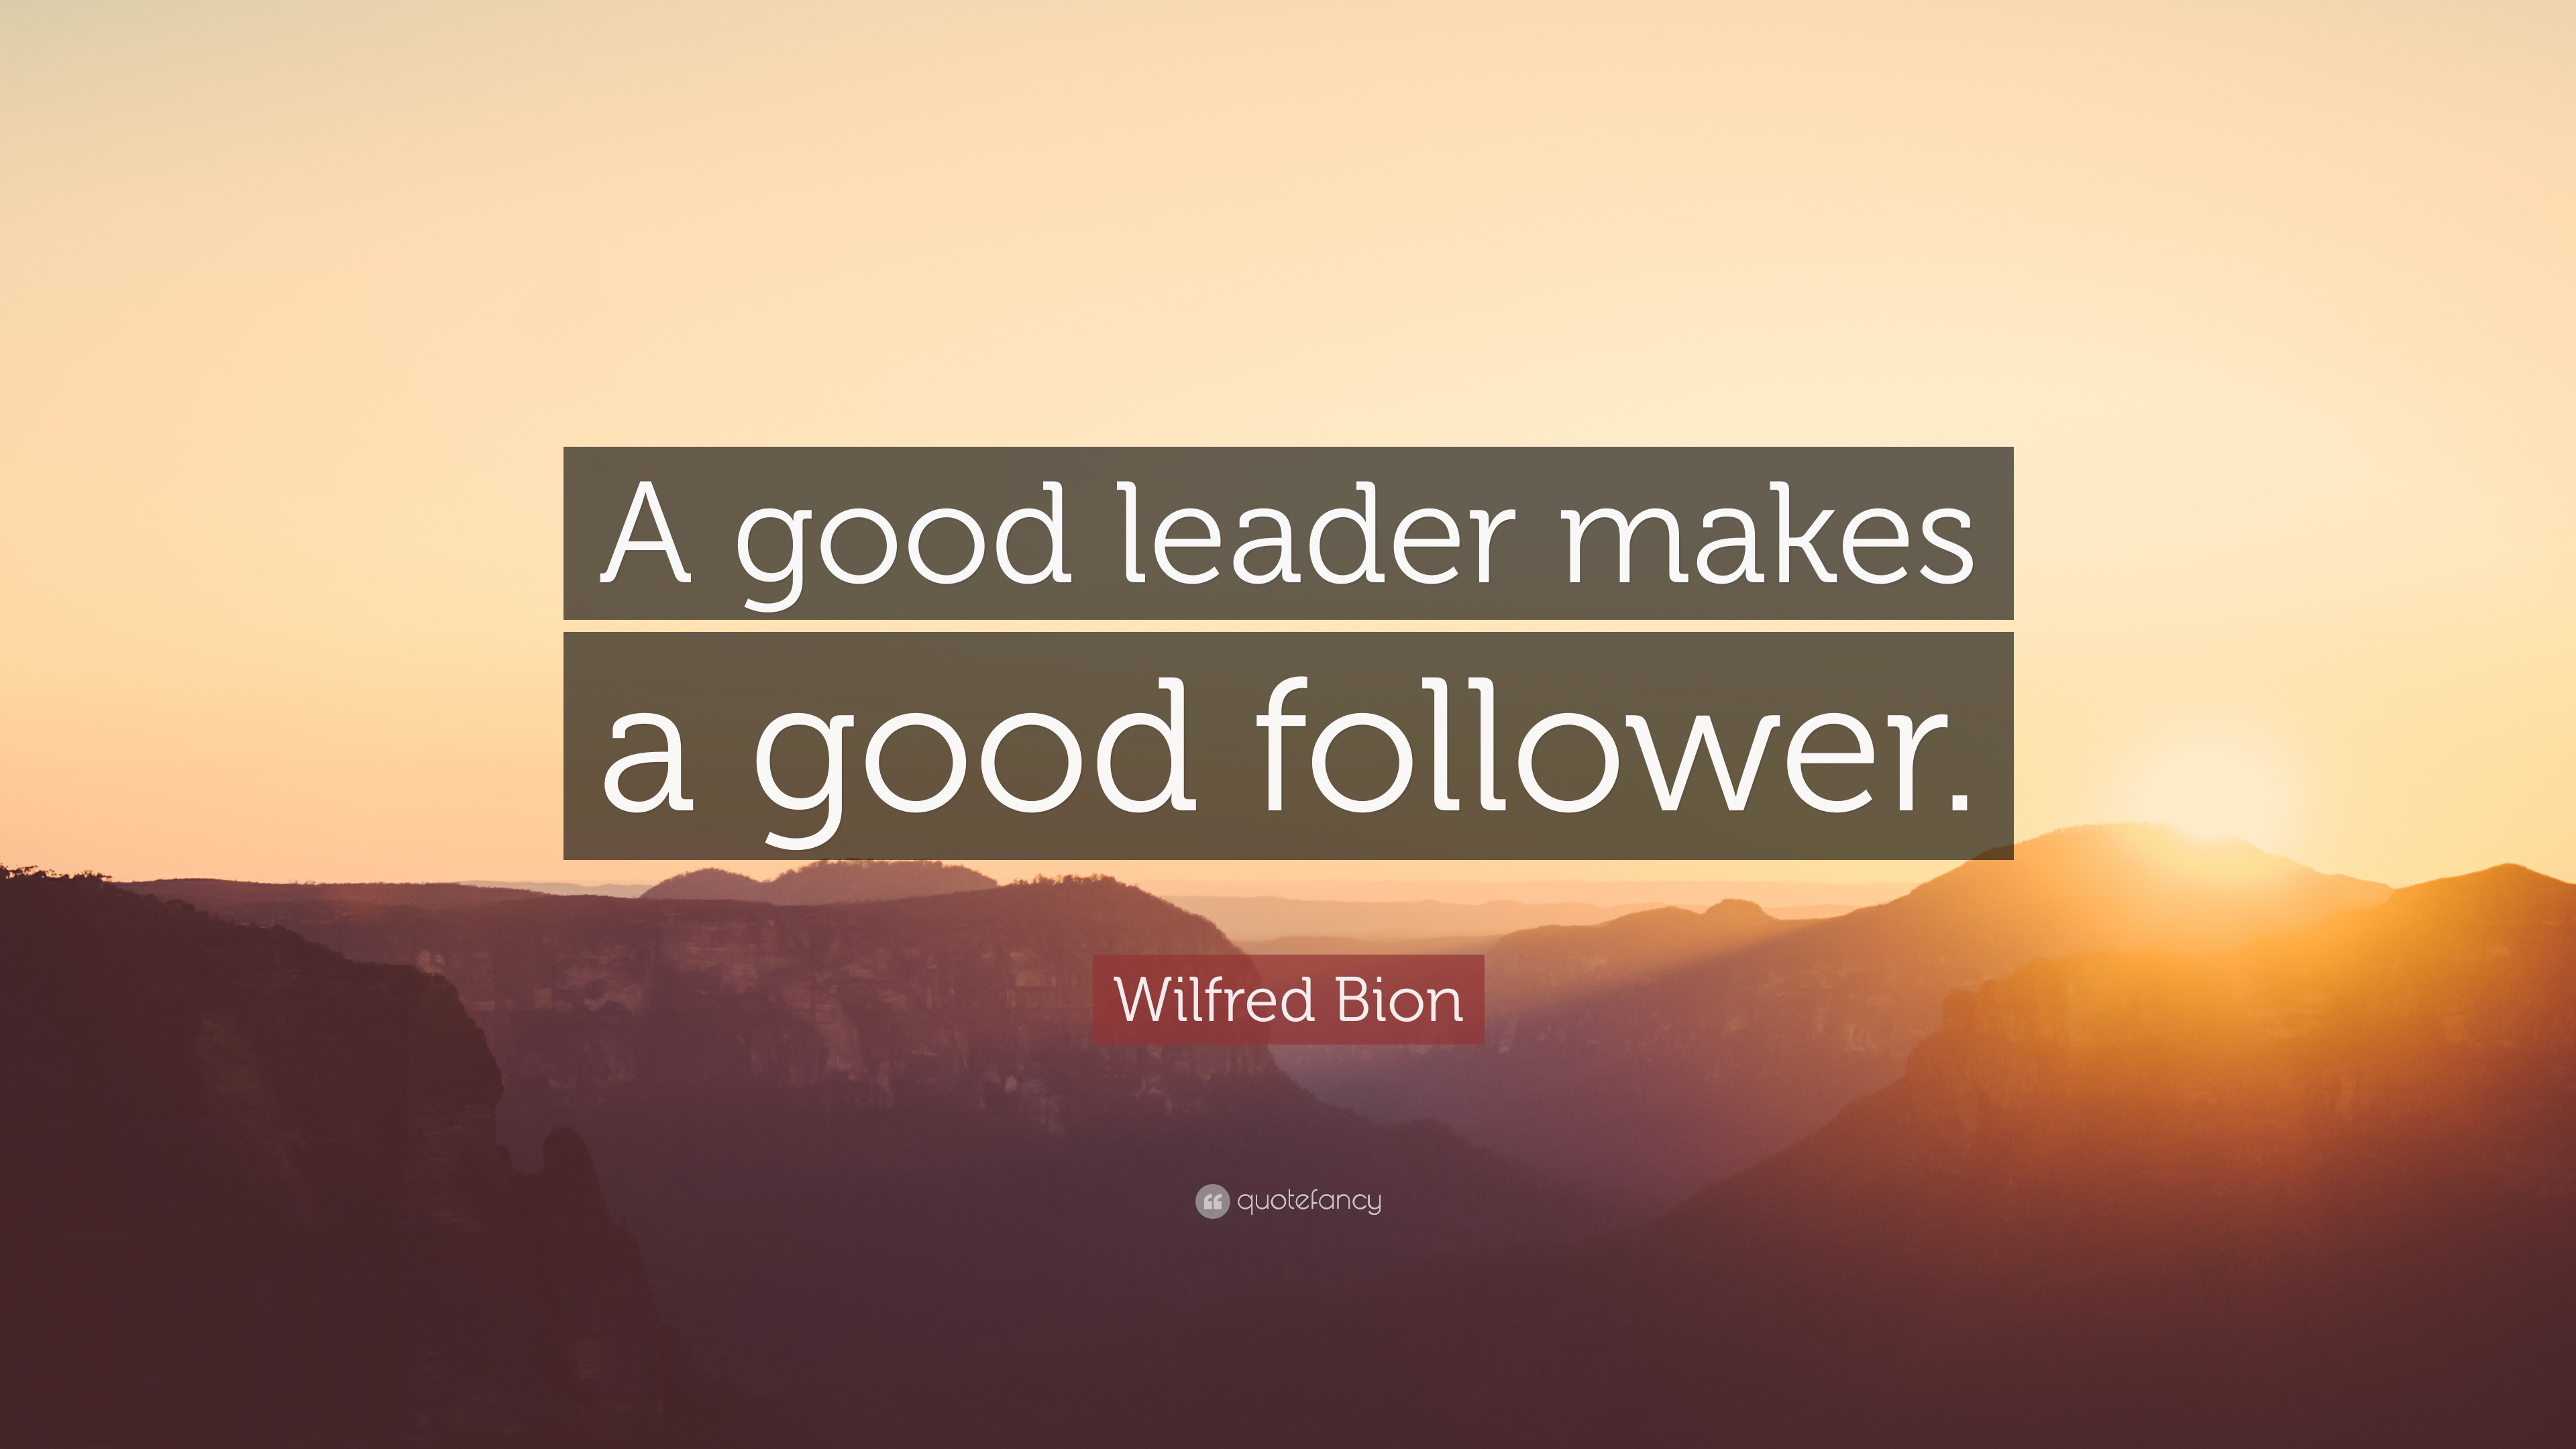 essay about a good leader is also a good follower